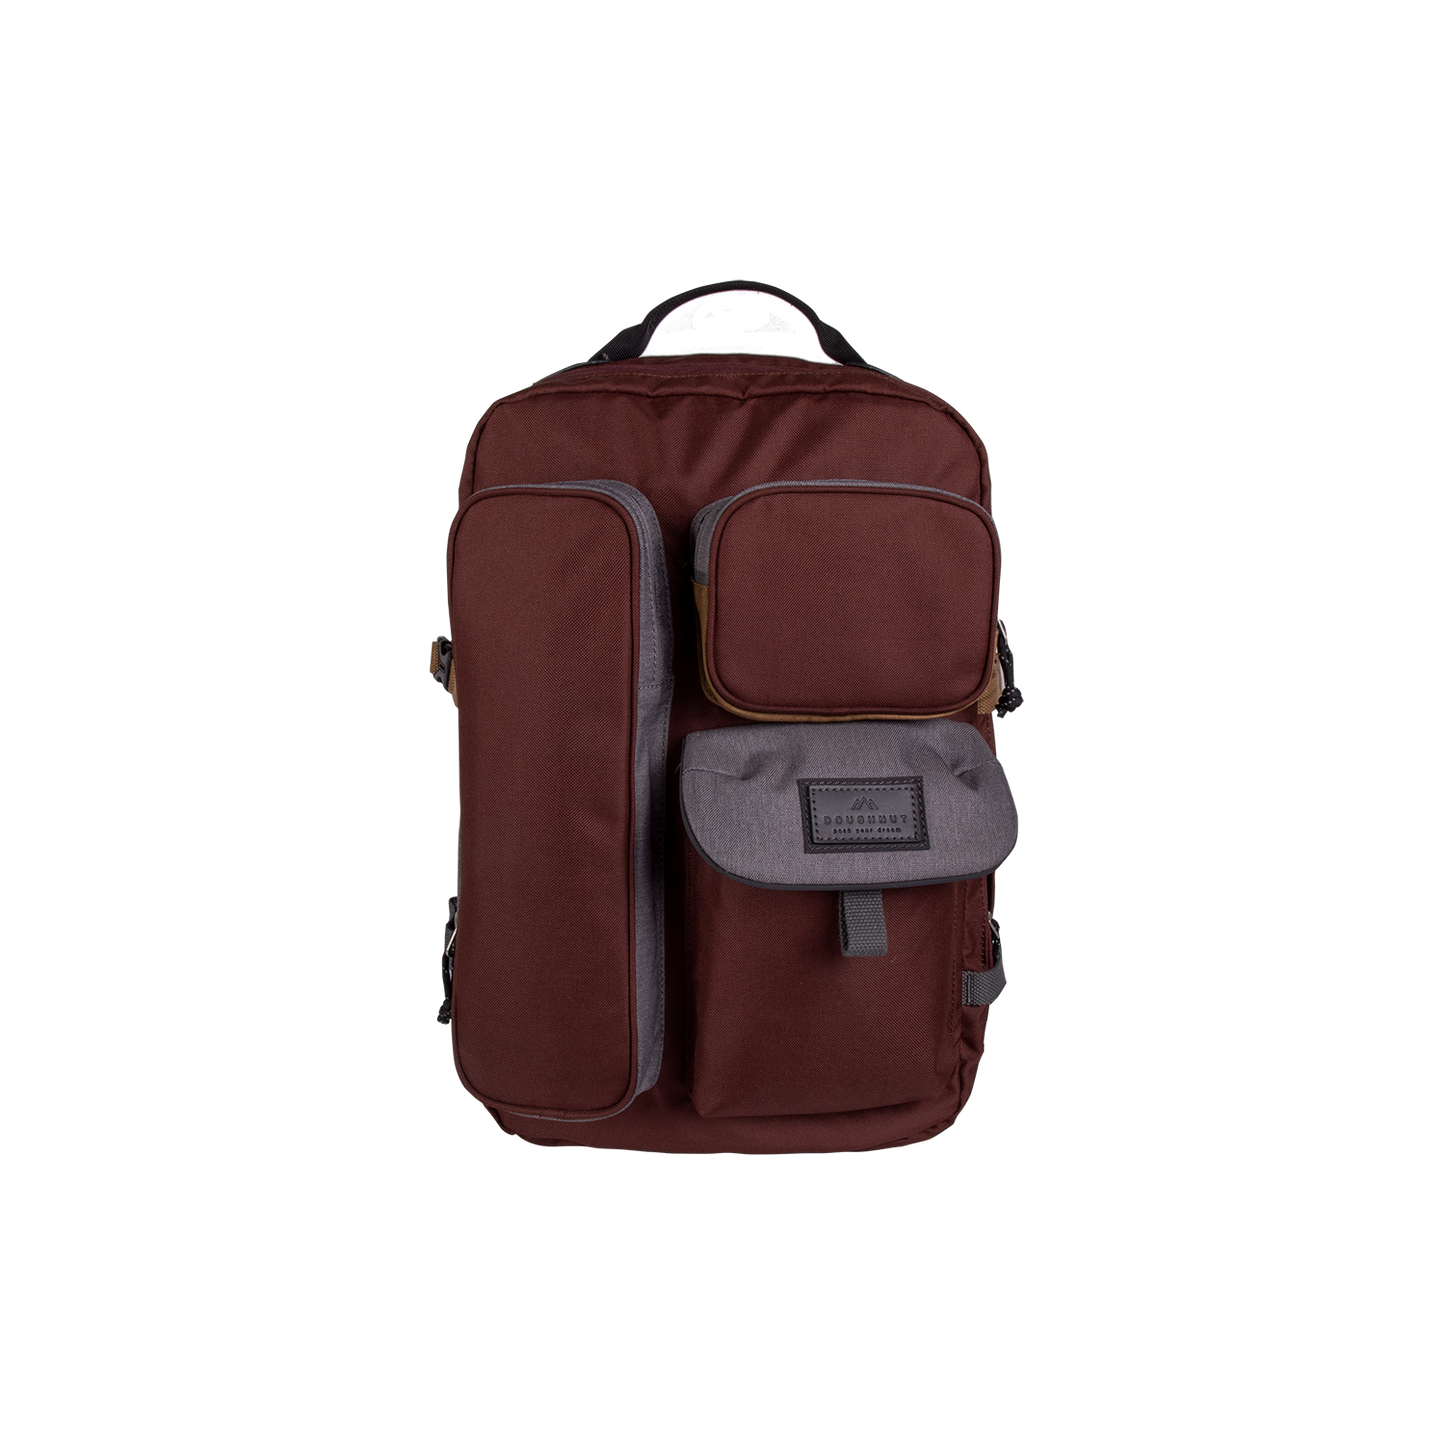 Ground Control Backpack